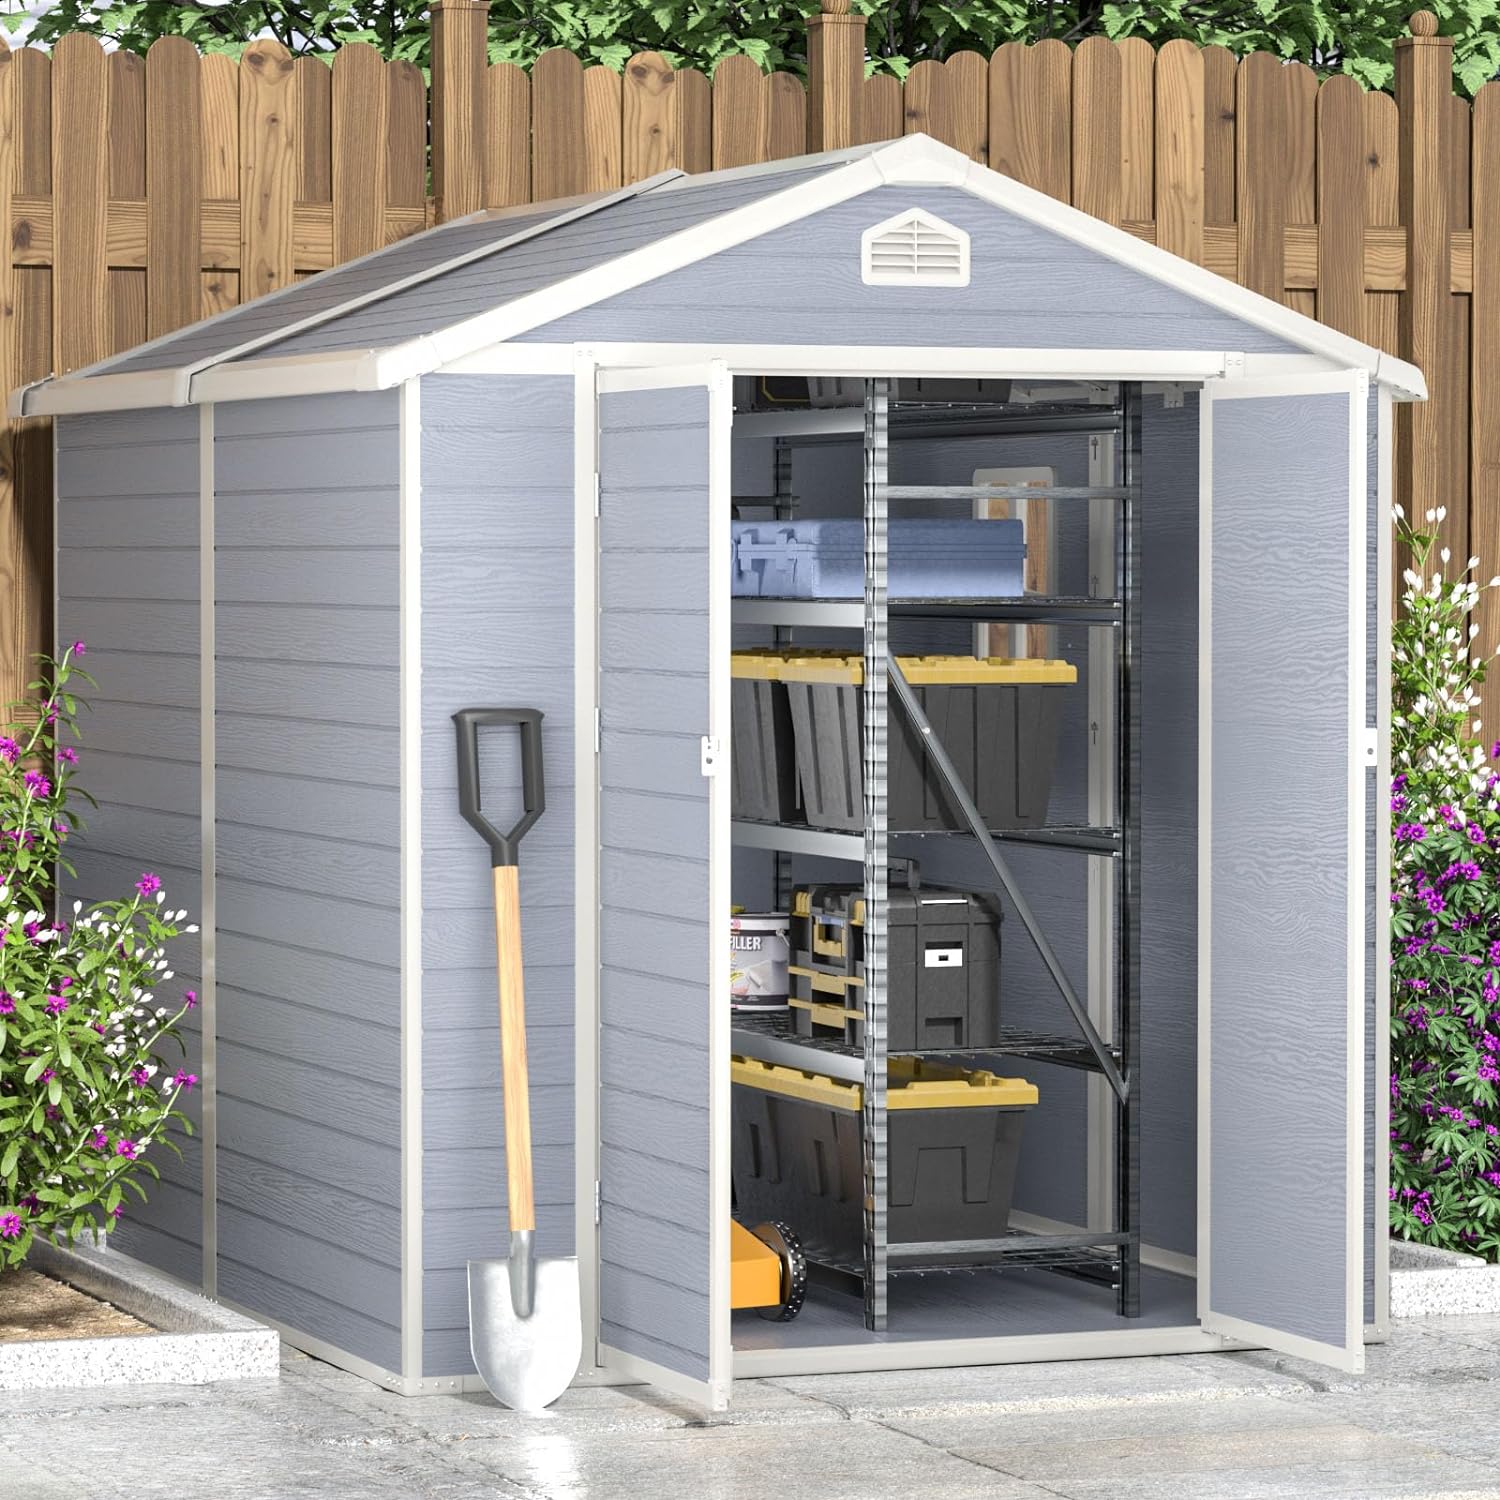 6’x8’ Resin Outdoor Storage Shed, Utility Tool Shed Storage House,  Gray